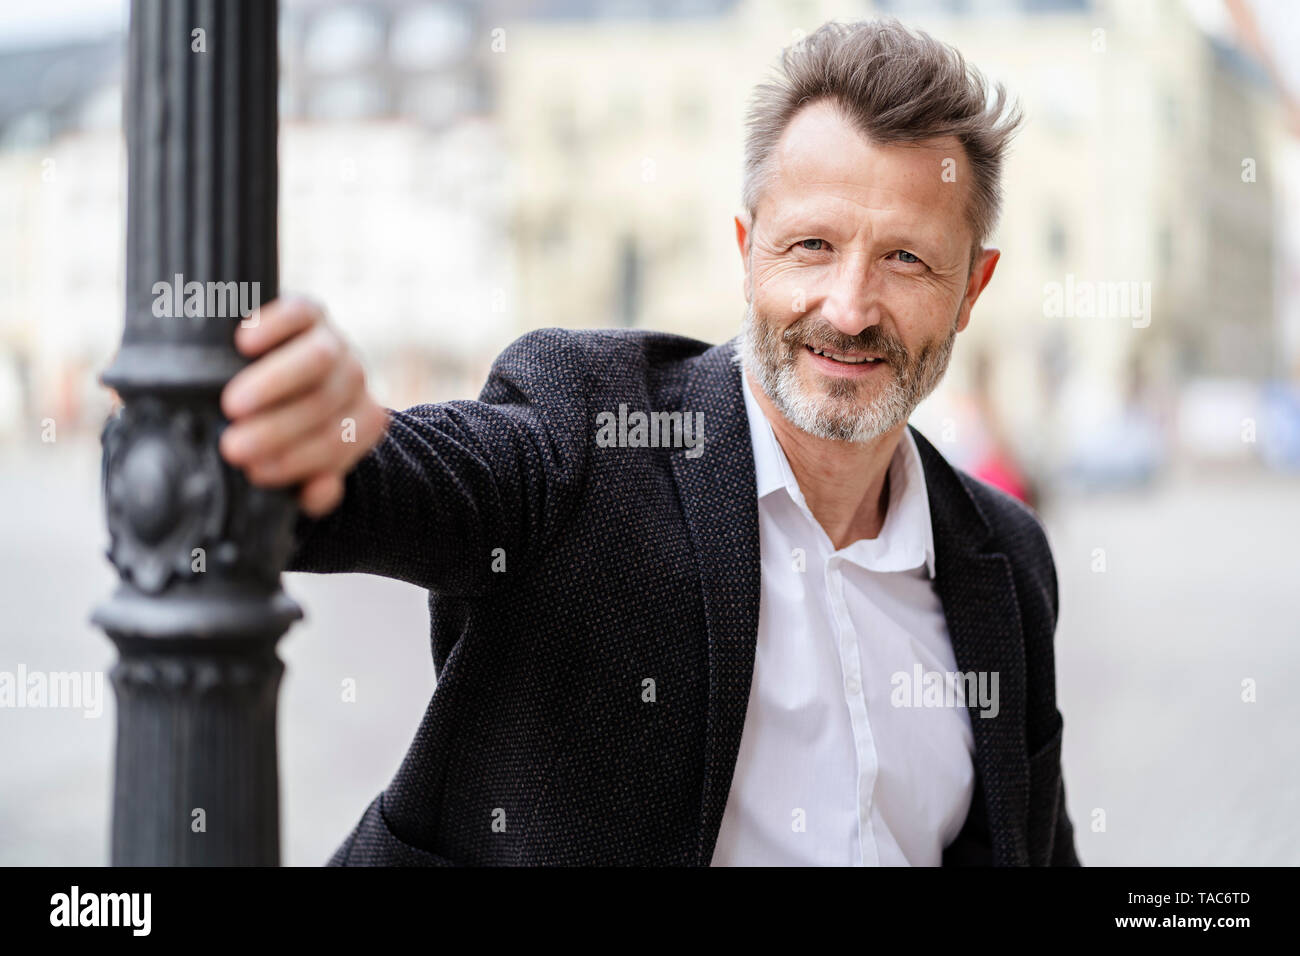 Portrait of smiling mature businessman with greying beard Stock Photo